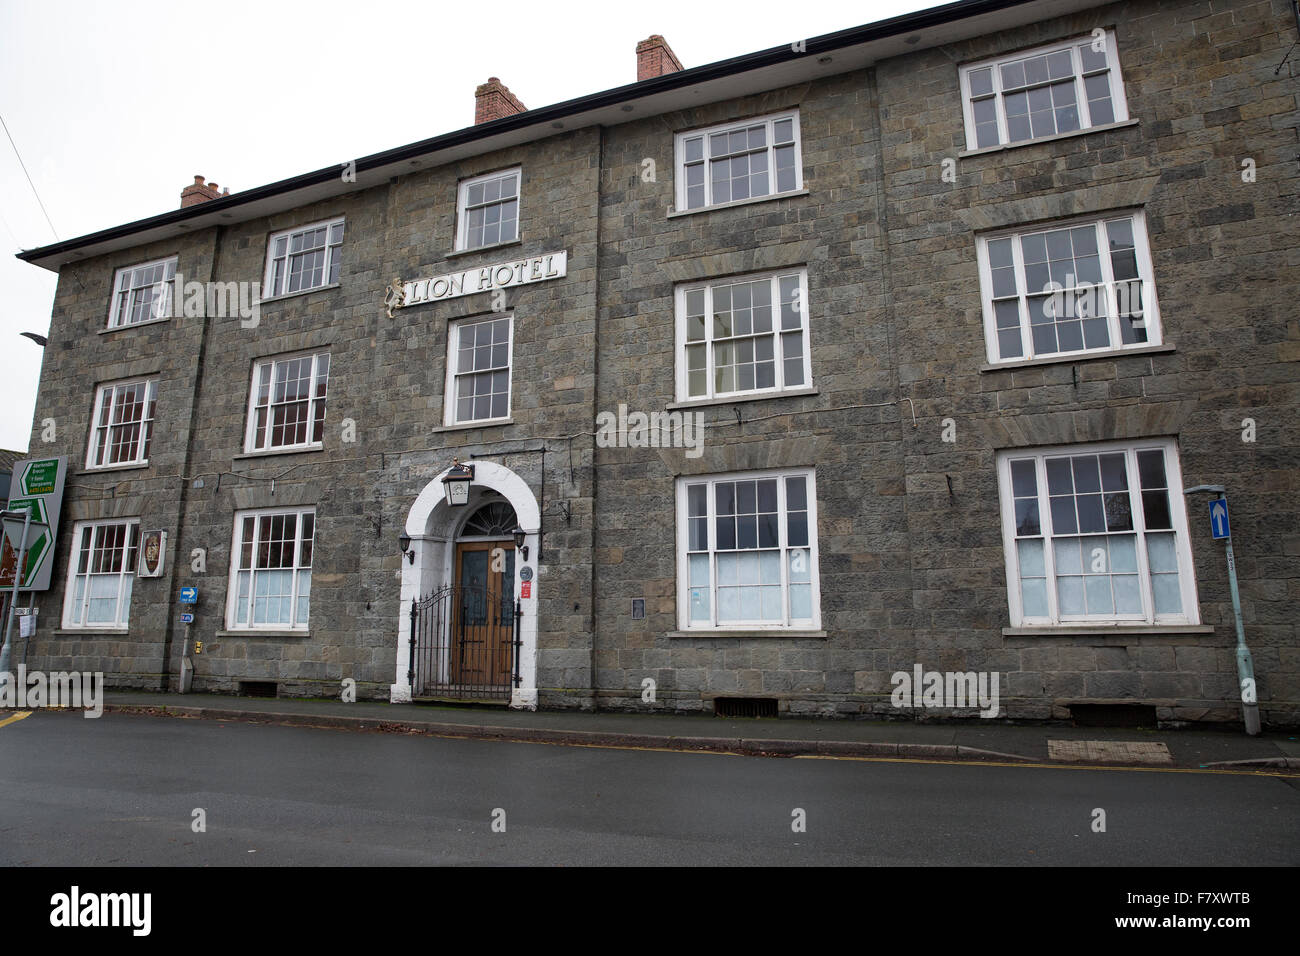 Lion Hotel in Builth Wells Wales Stock Photo